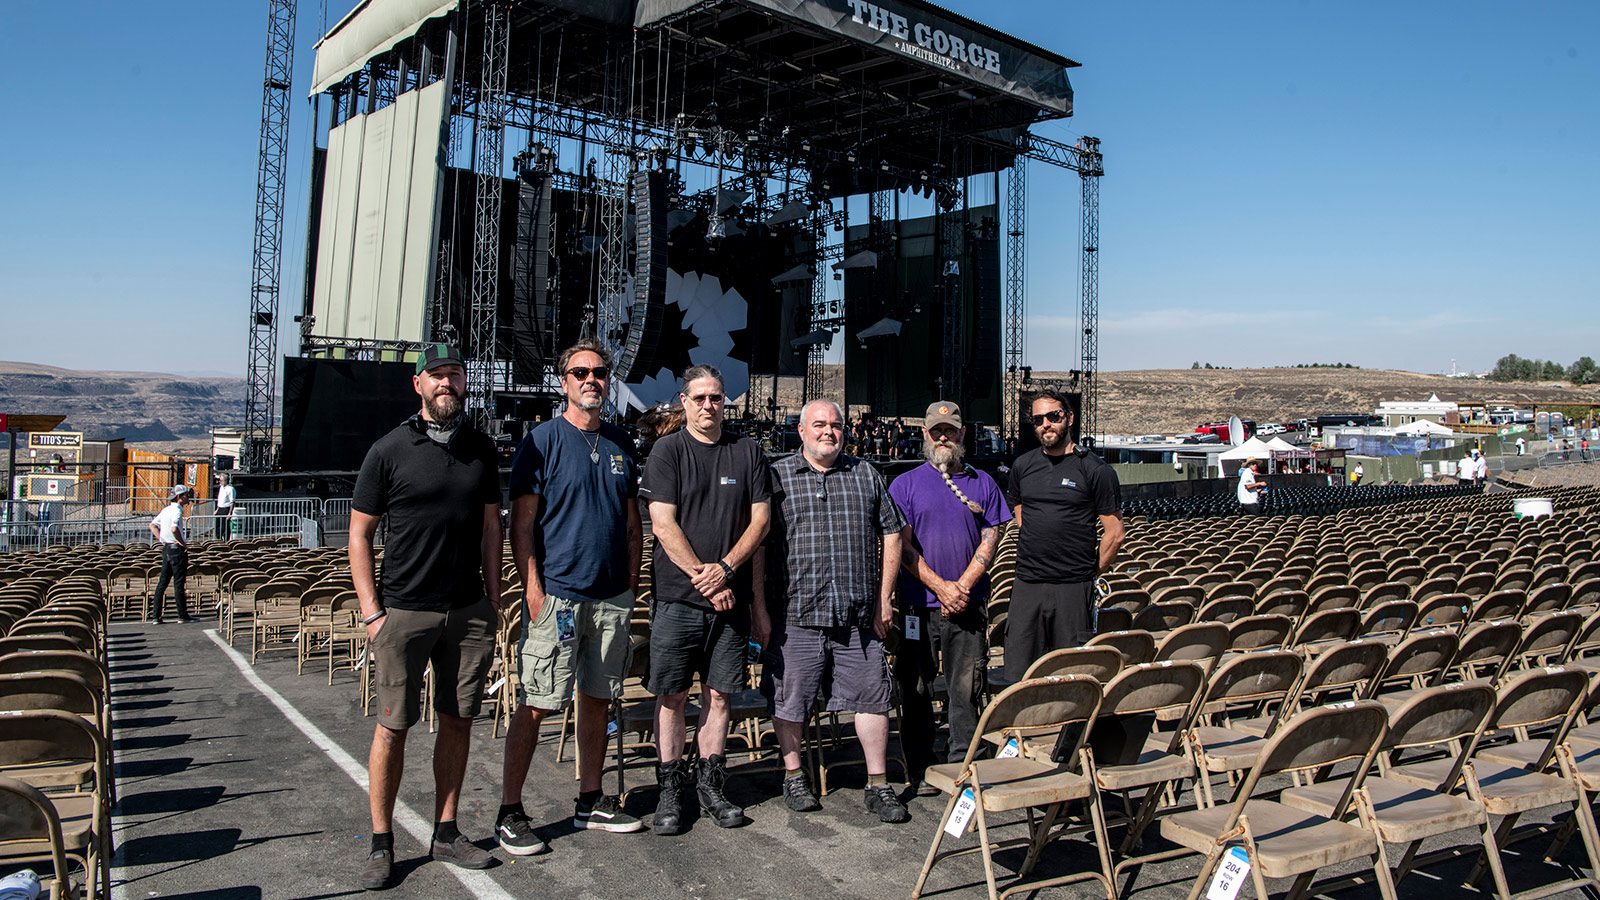 Dave Matthews Band and UltraSound Crew at The Gorge (L-R): Michal Kacunel, Systems Engineer; Joe Lawlor, Recording Tech; Greg Botimer, Monitor Tech; Ian Kuhn, Monitor Engineer; Lonnie Quinn, Monitor System Engineer; Sam Brodsky, PA Tech